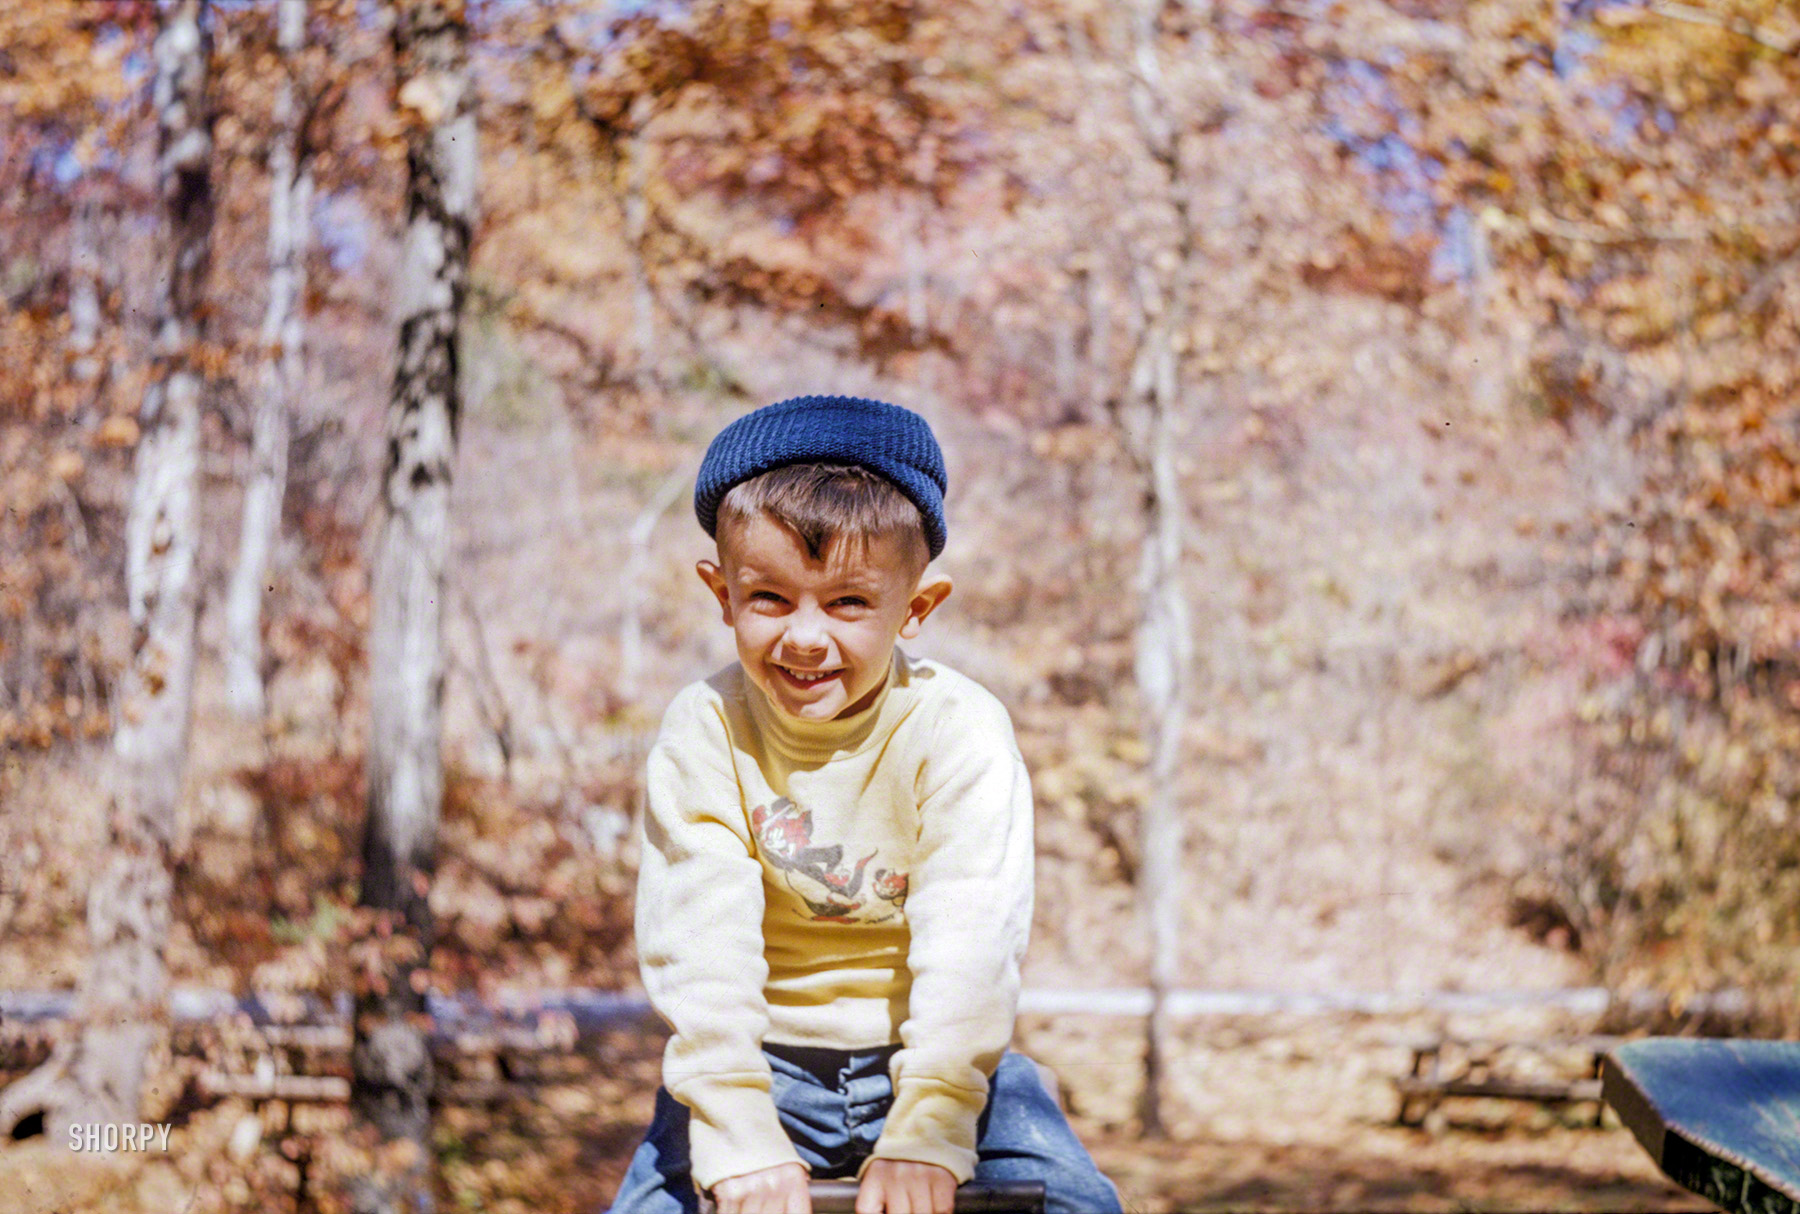 "1952. Stephen on seesaw at Spring Mill State Park." 35mm color slide from a batch of Kodachromes that Shorpy bought years ago on eBay and just found at the back of a drawer we were cleaning out. View full size.